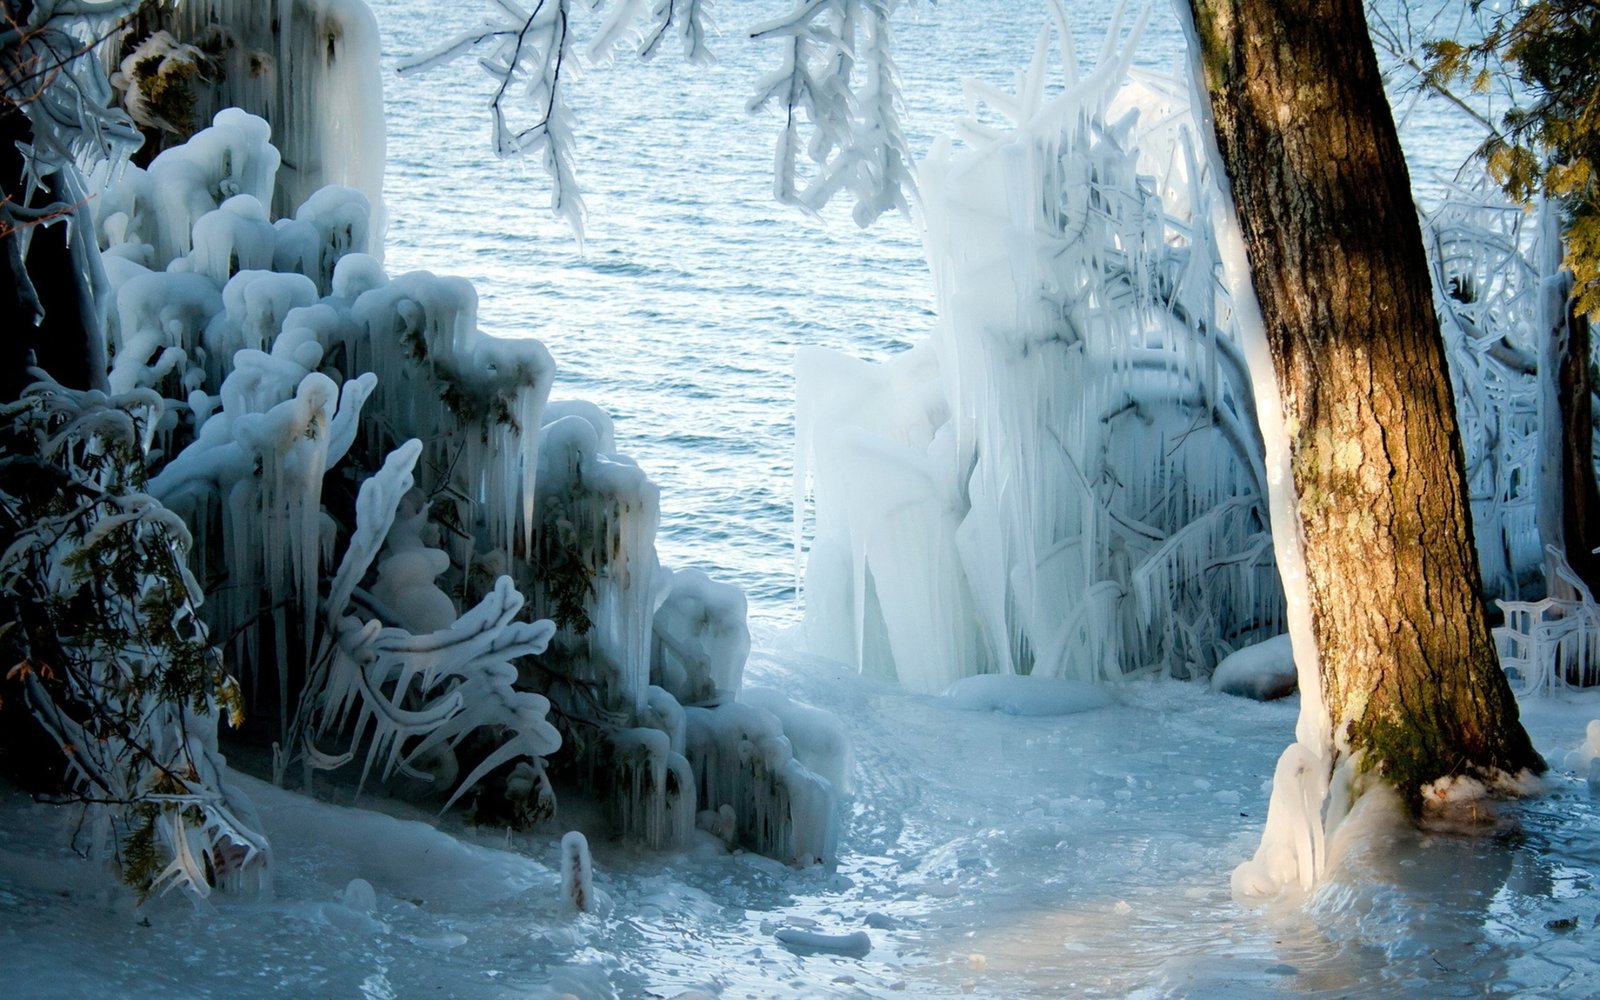 Shivering Ice storms Photography (3)